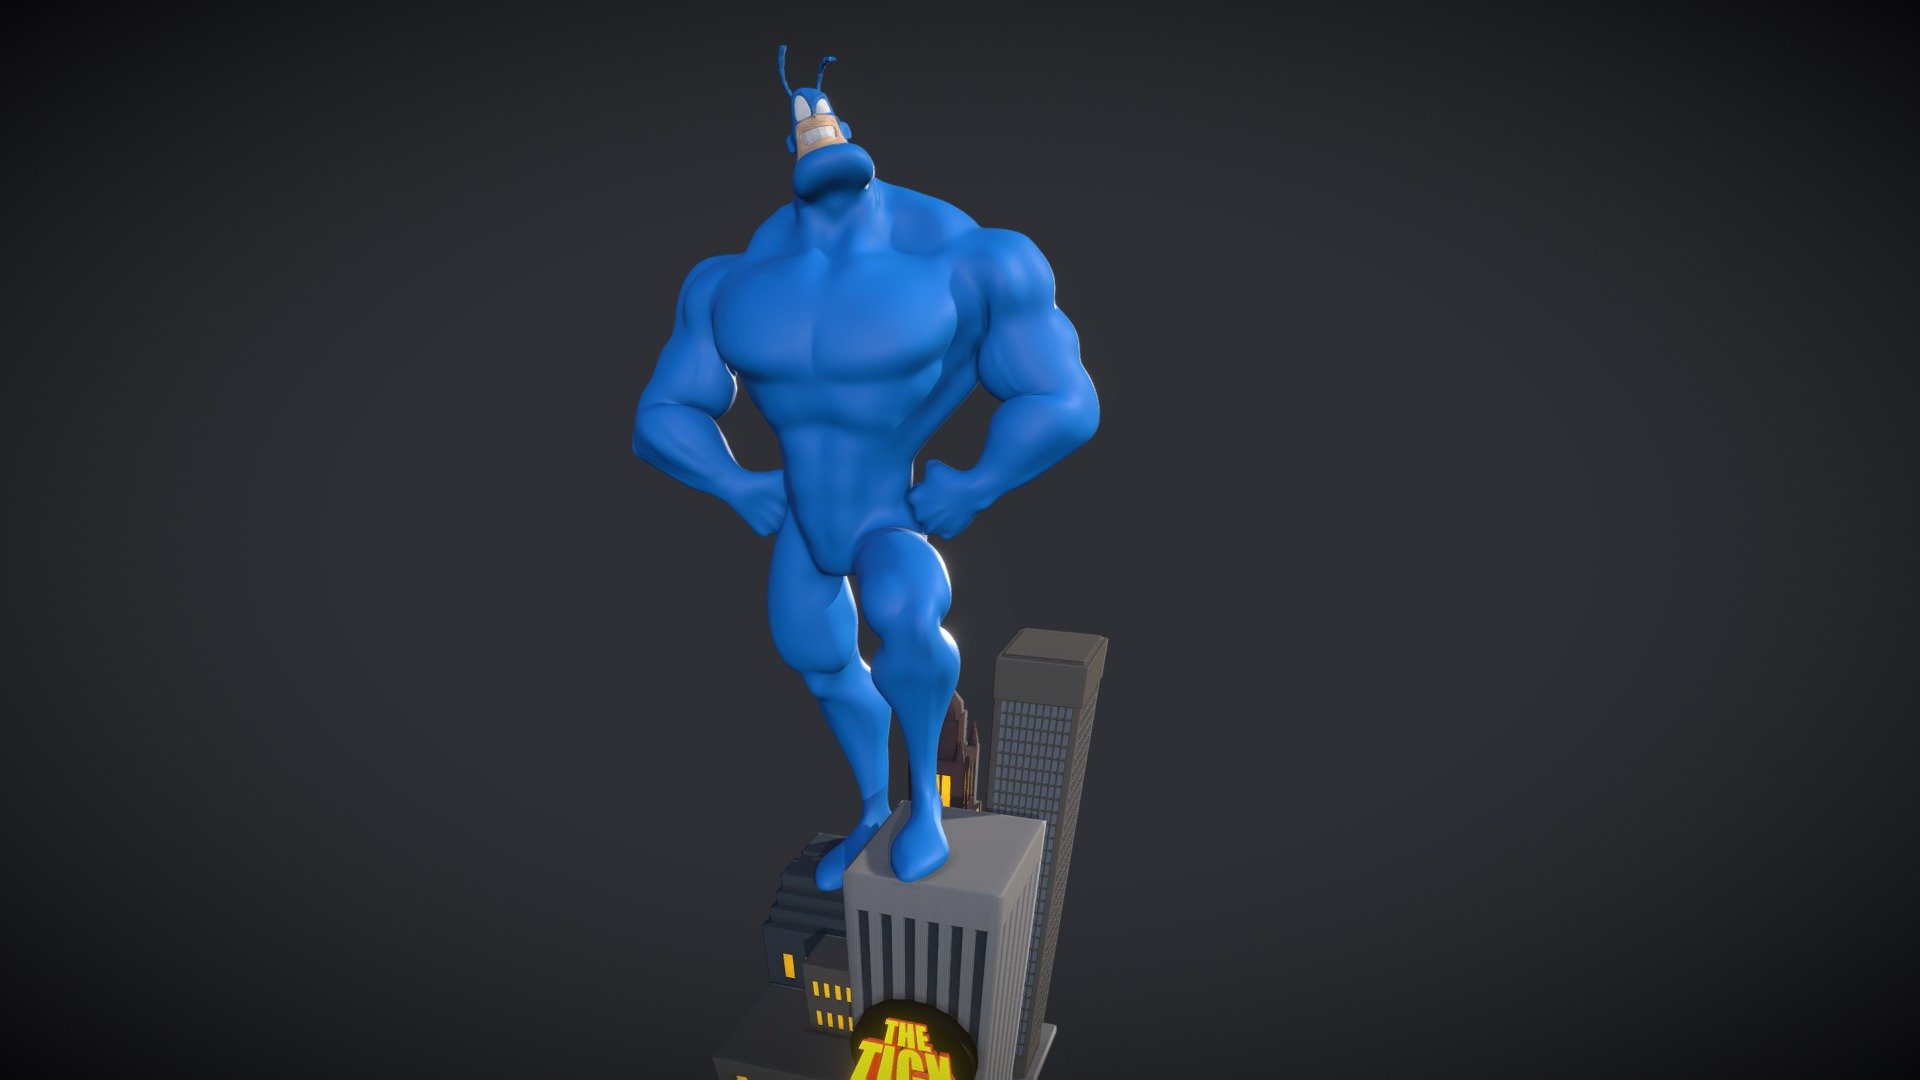 The big blue nigh-invulnerable one himself. From Ben Edlund's animated series of &ldquo;The Tick.